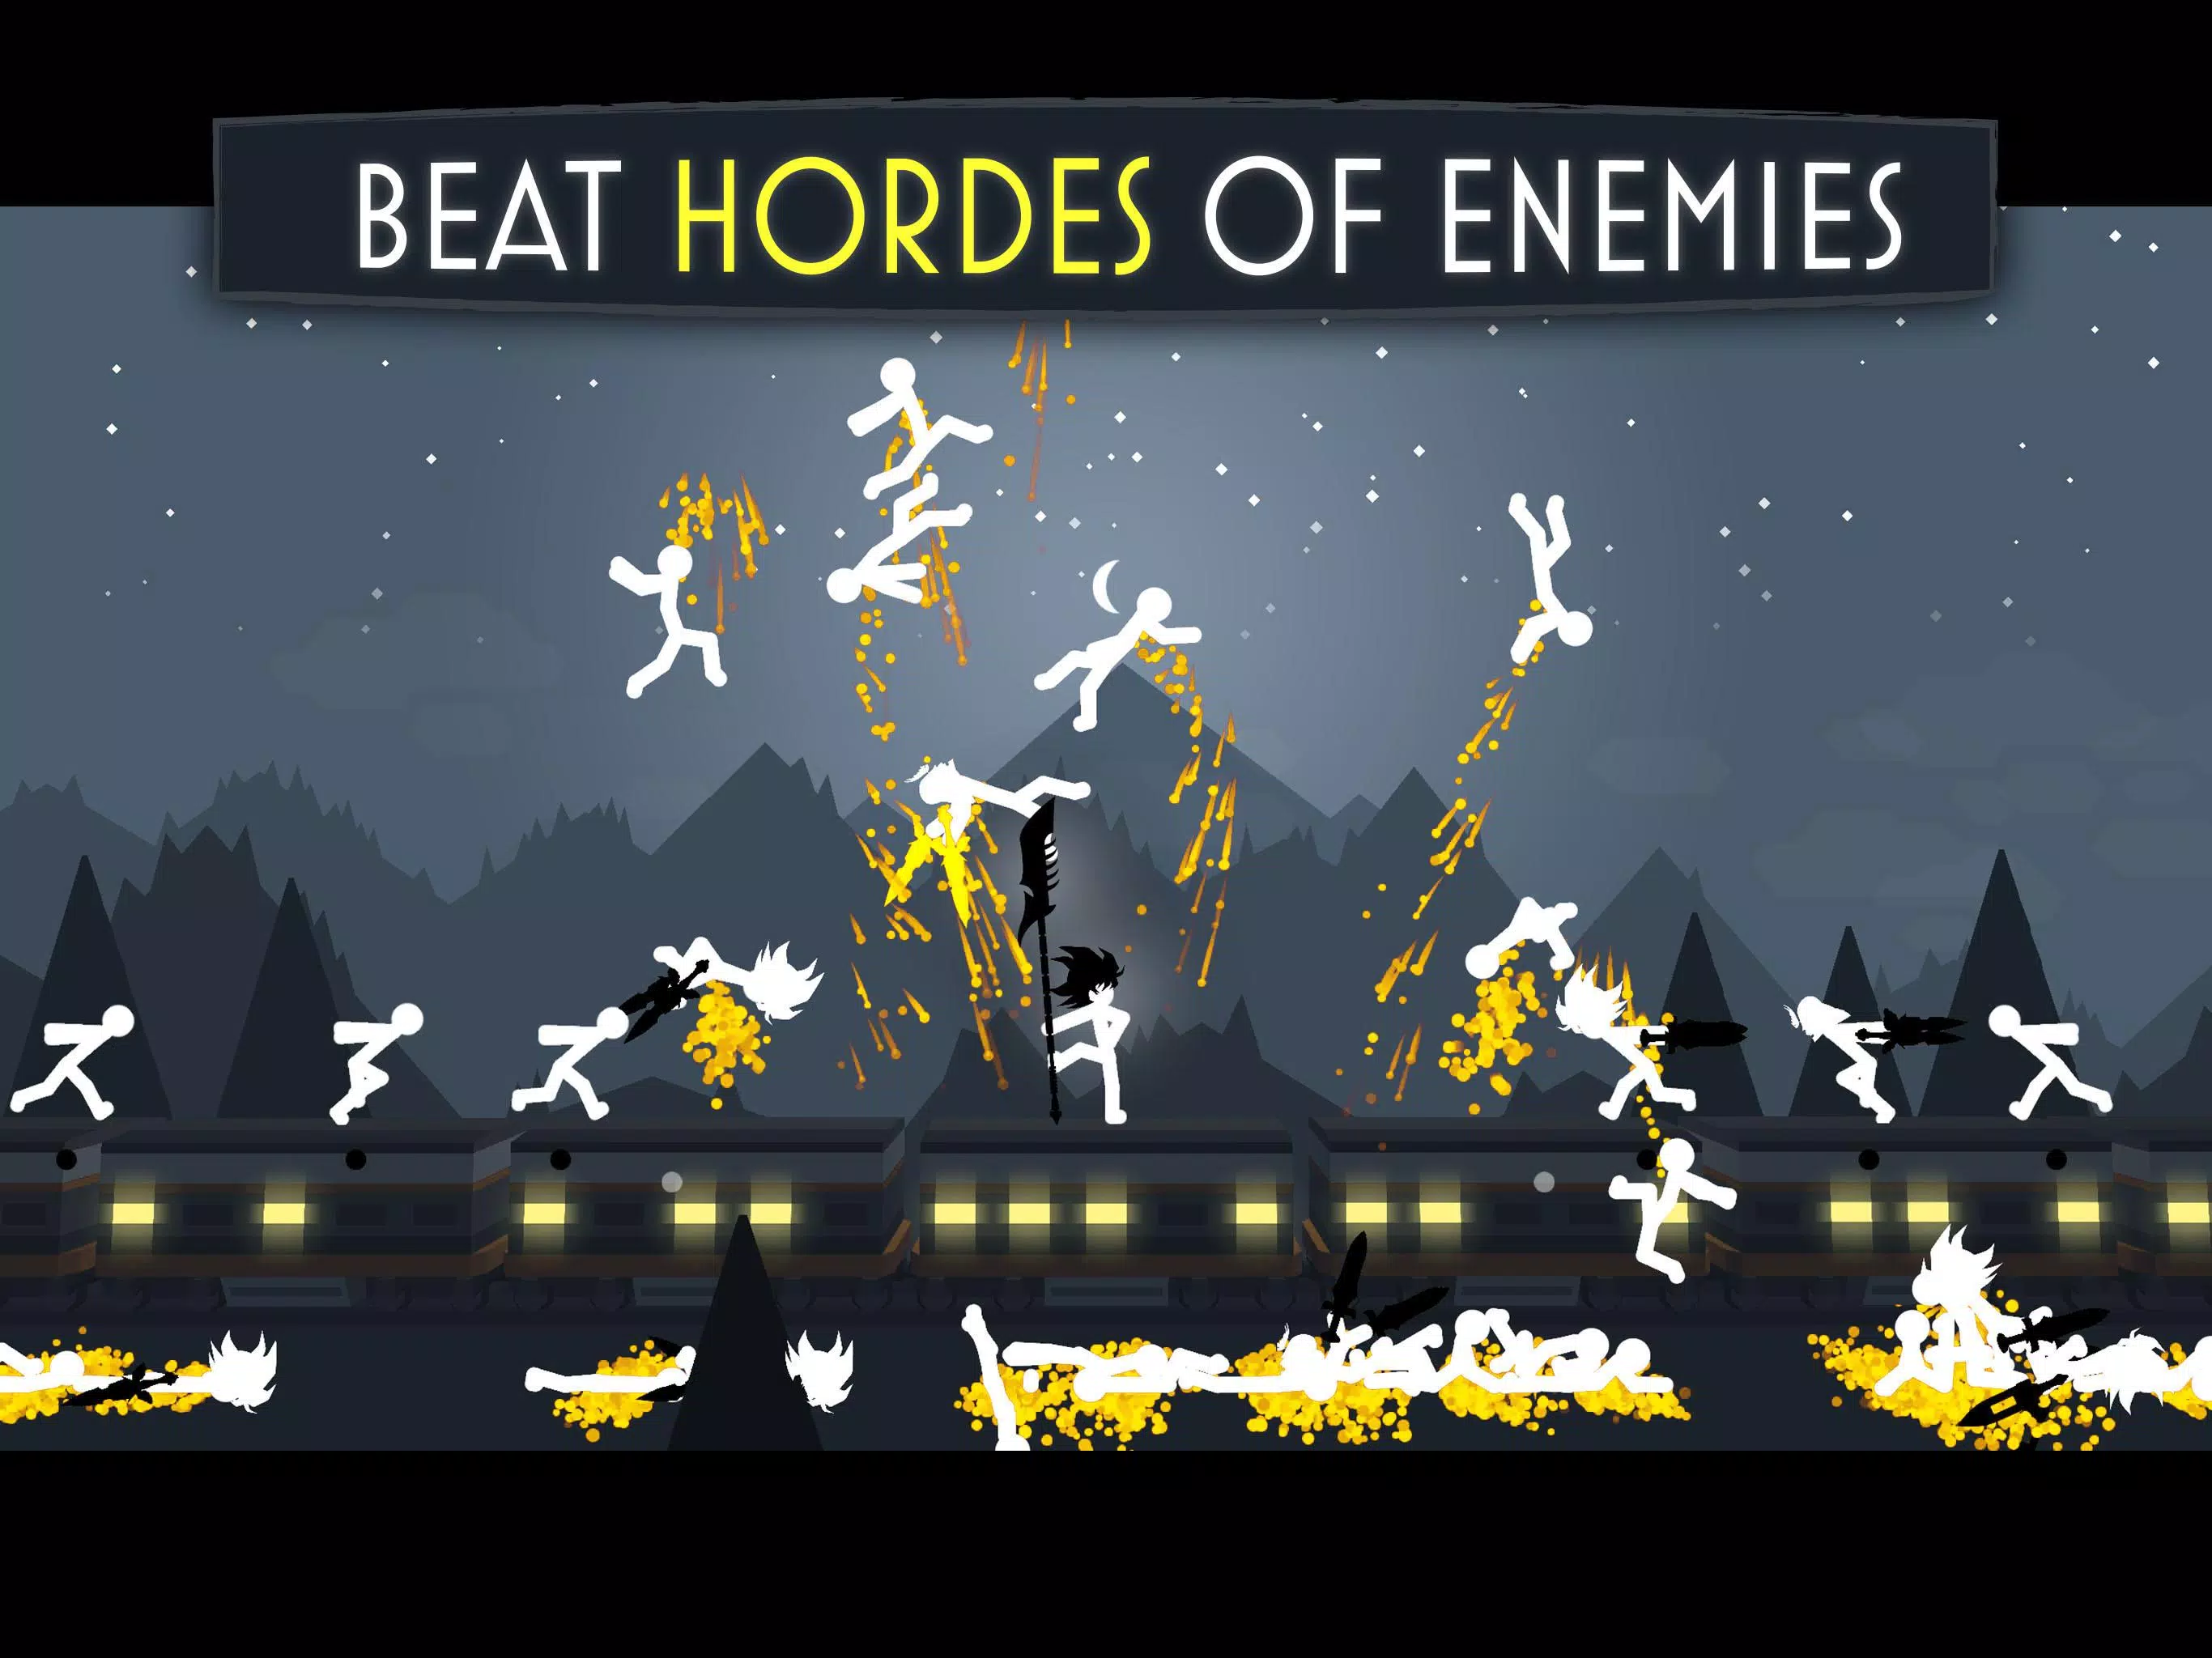 Stick Fight: Shadow Warrior - Download & Play for Free Here